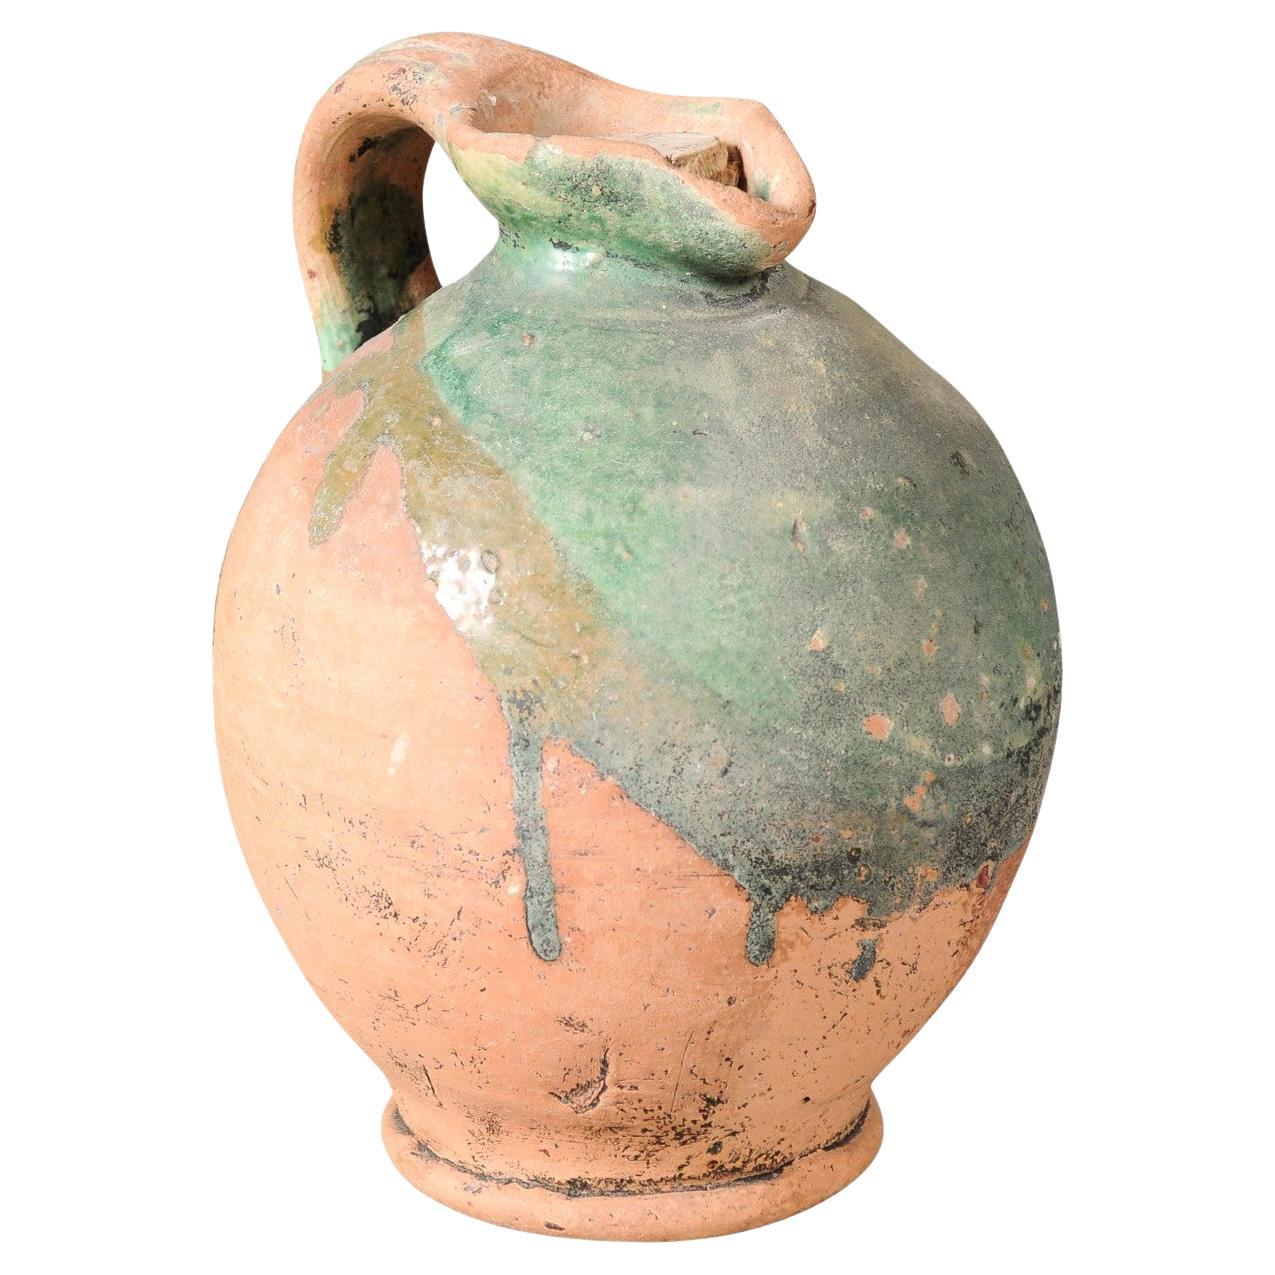 Rustic French Provincial 19th Century Pottery Jug with Green Glazed Accents For Sale